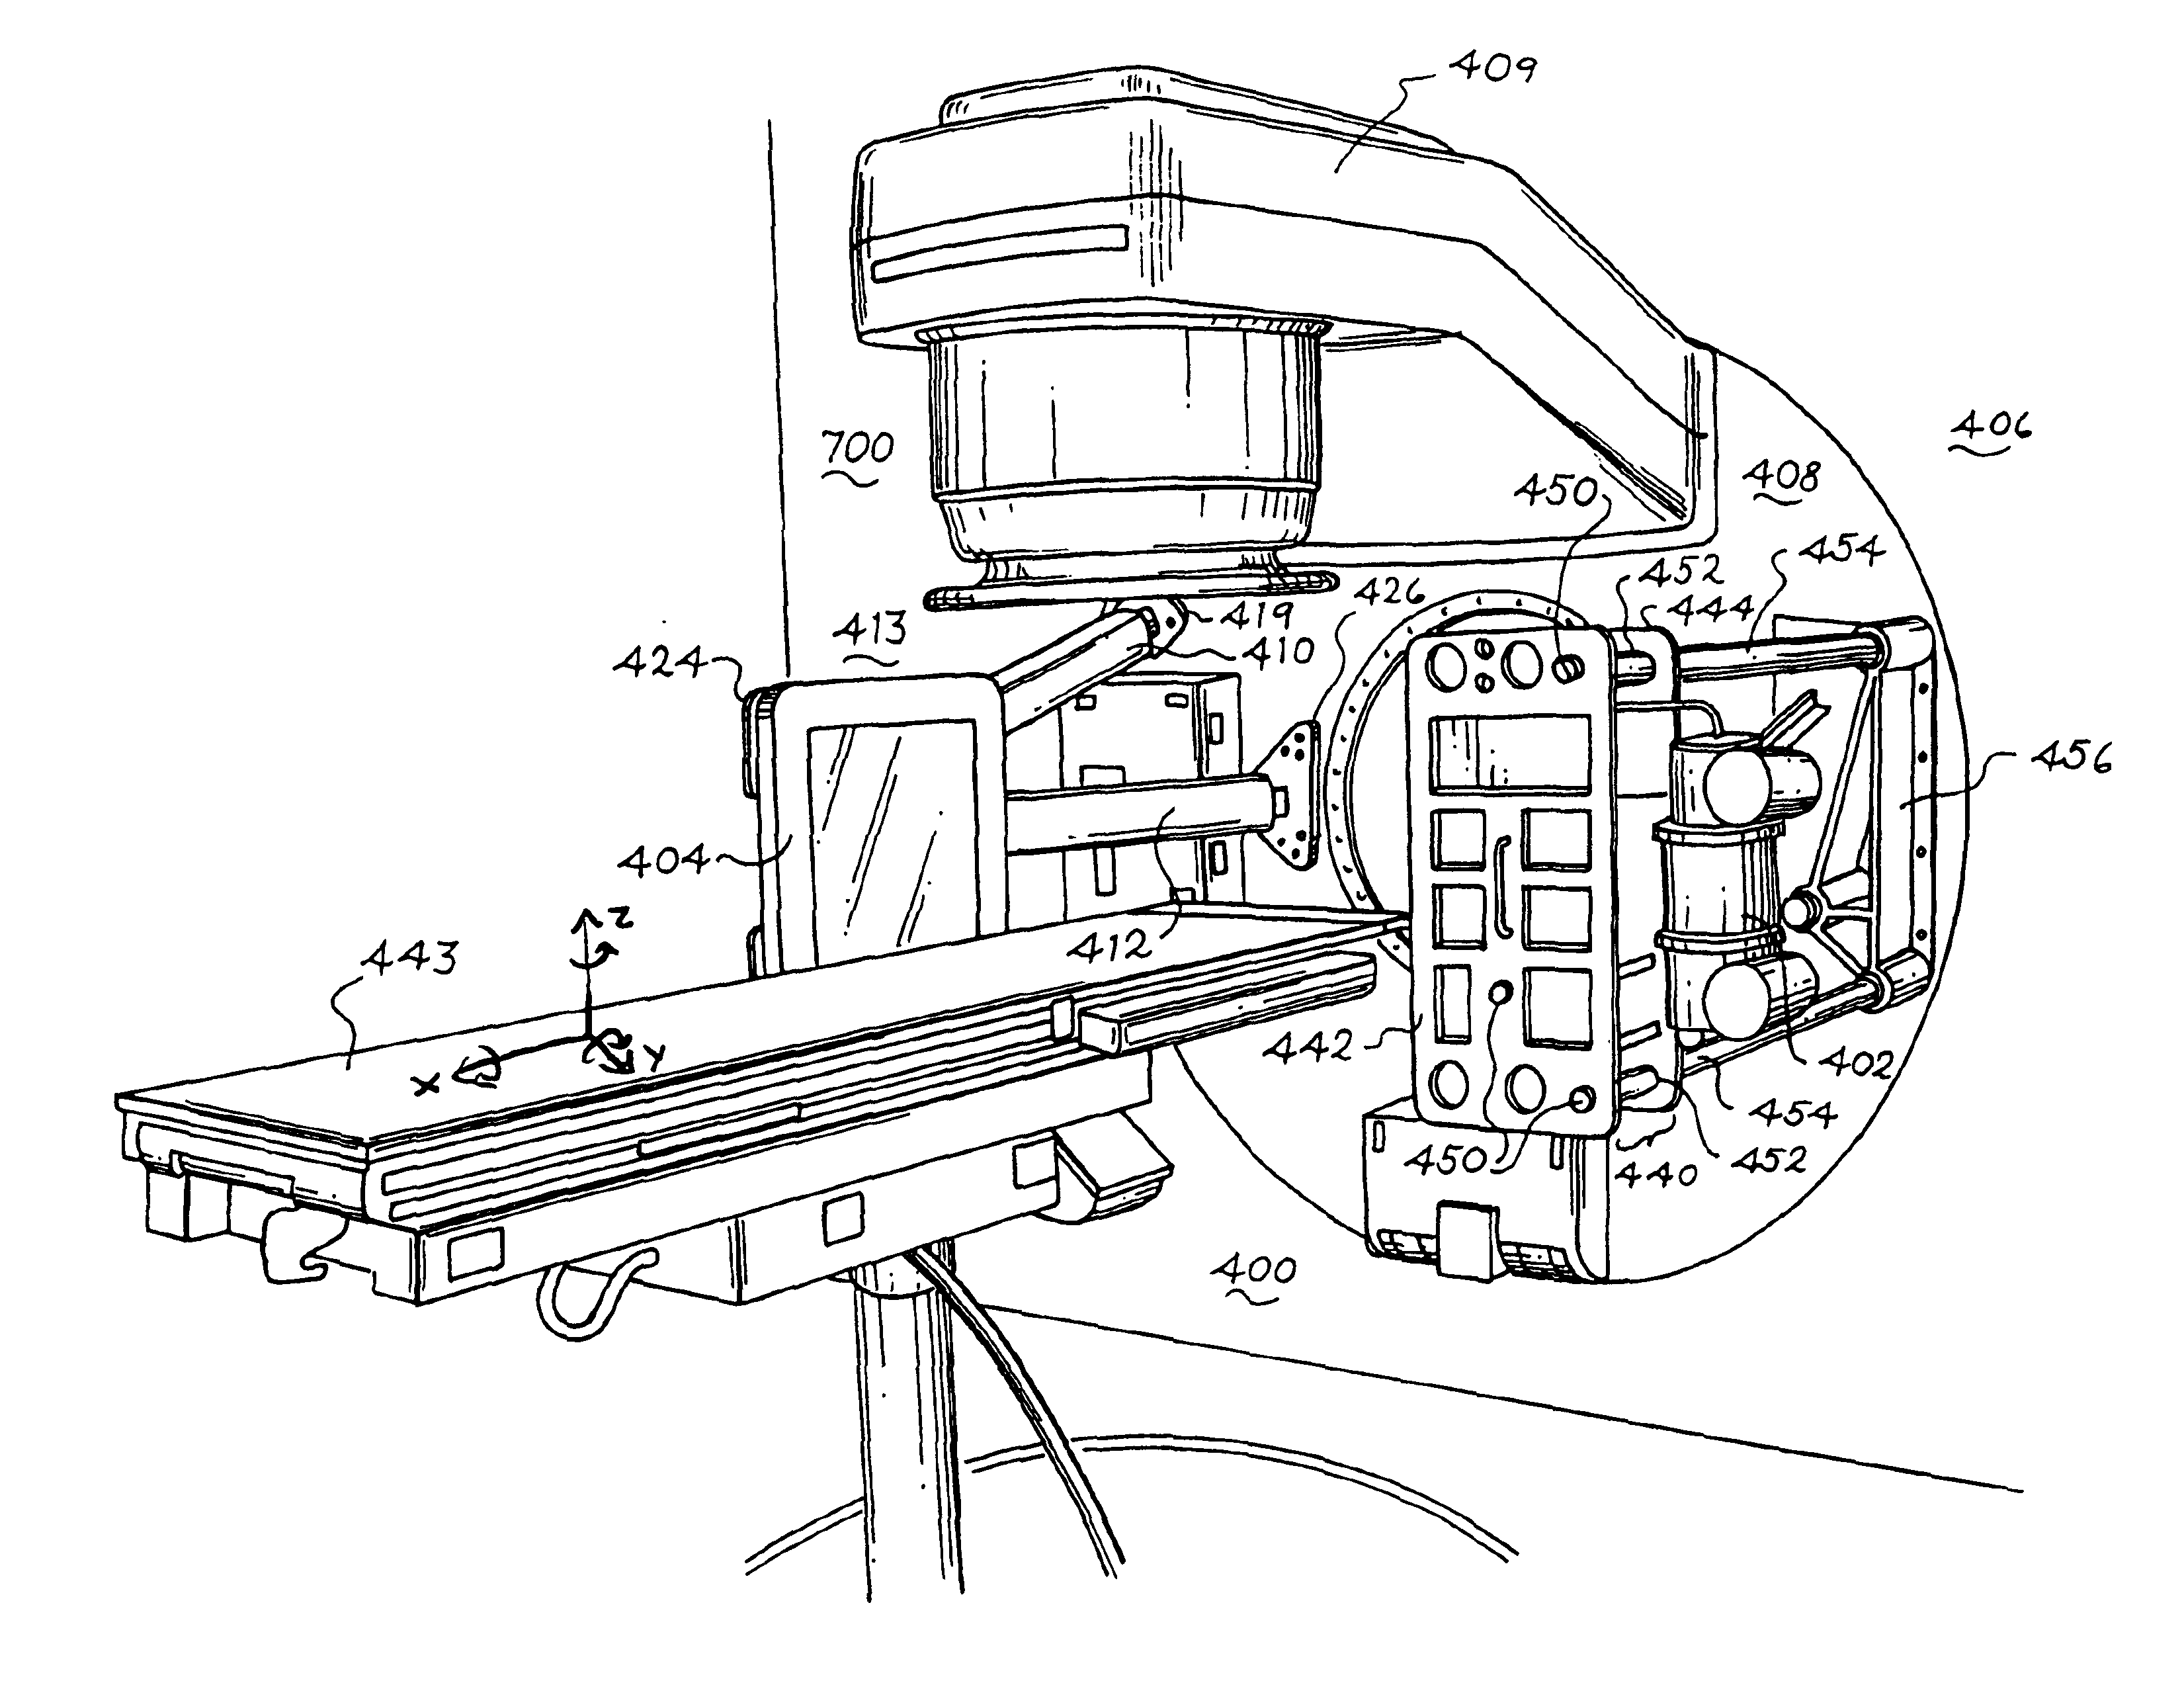 Cone beam computed tomography with a flat panel imager